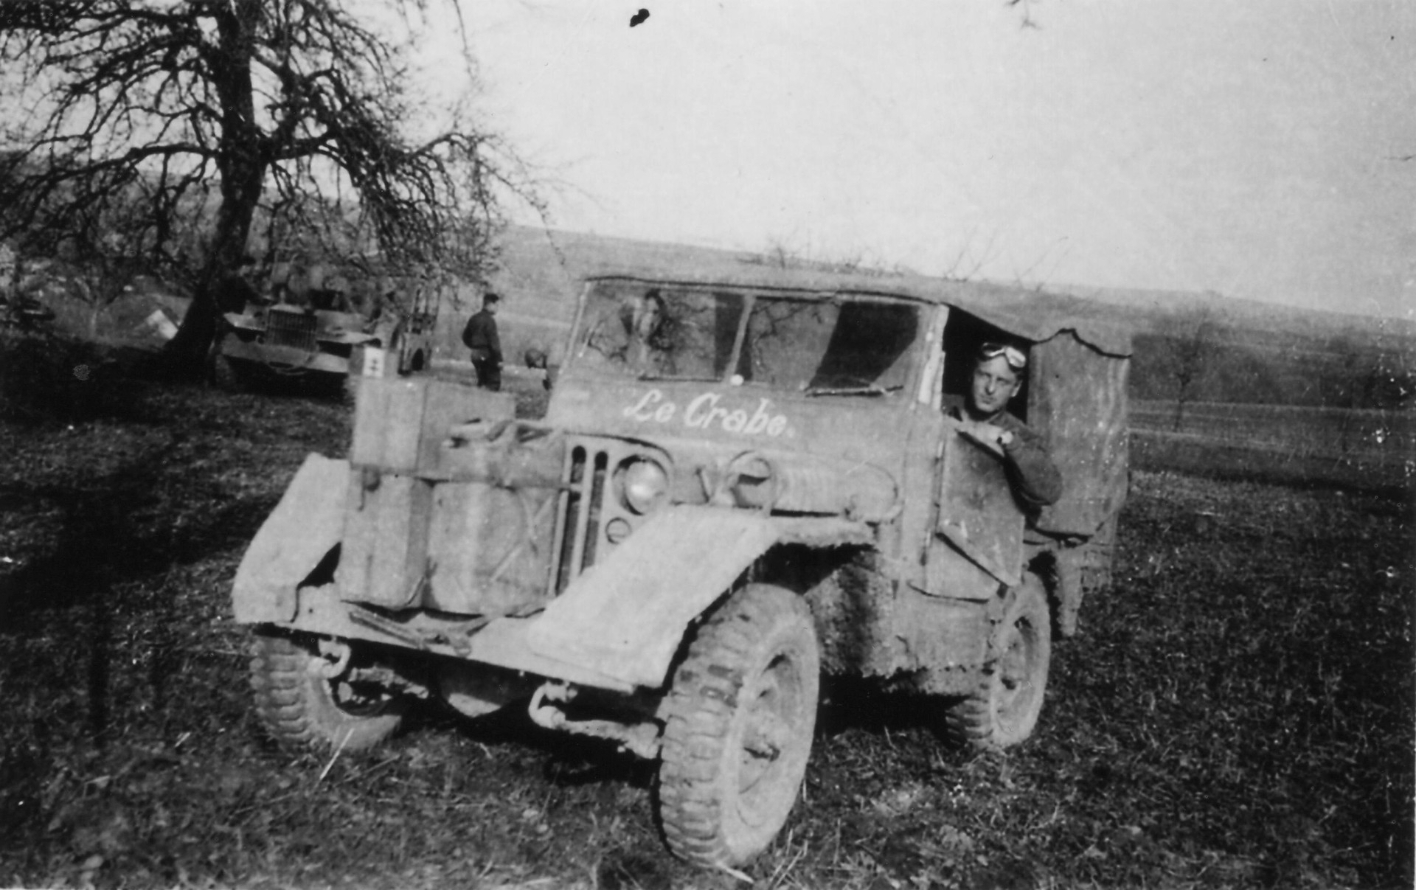 A Jeep, which was marked below the windshield with the lettering "Le Crabe". Bezin canisters and toolboxes were attached to the Jeep's radiator. Paul Bodot looks out of the side window.